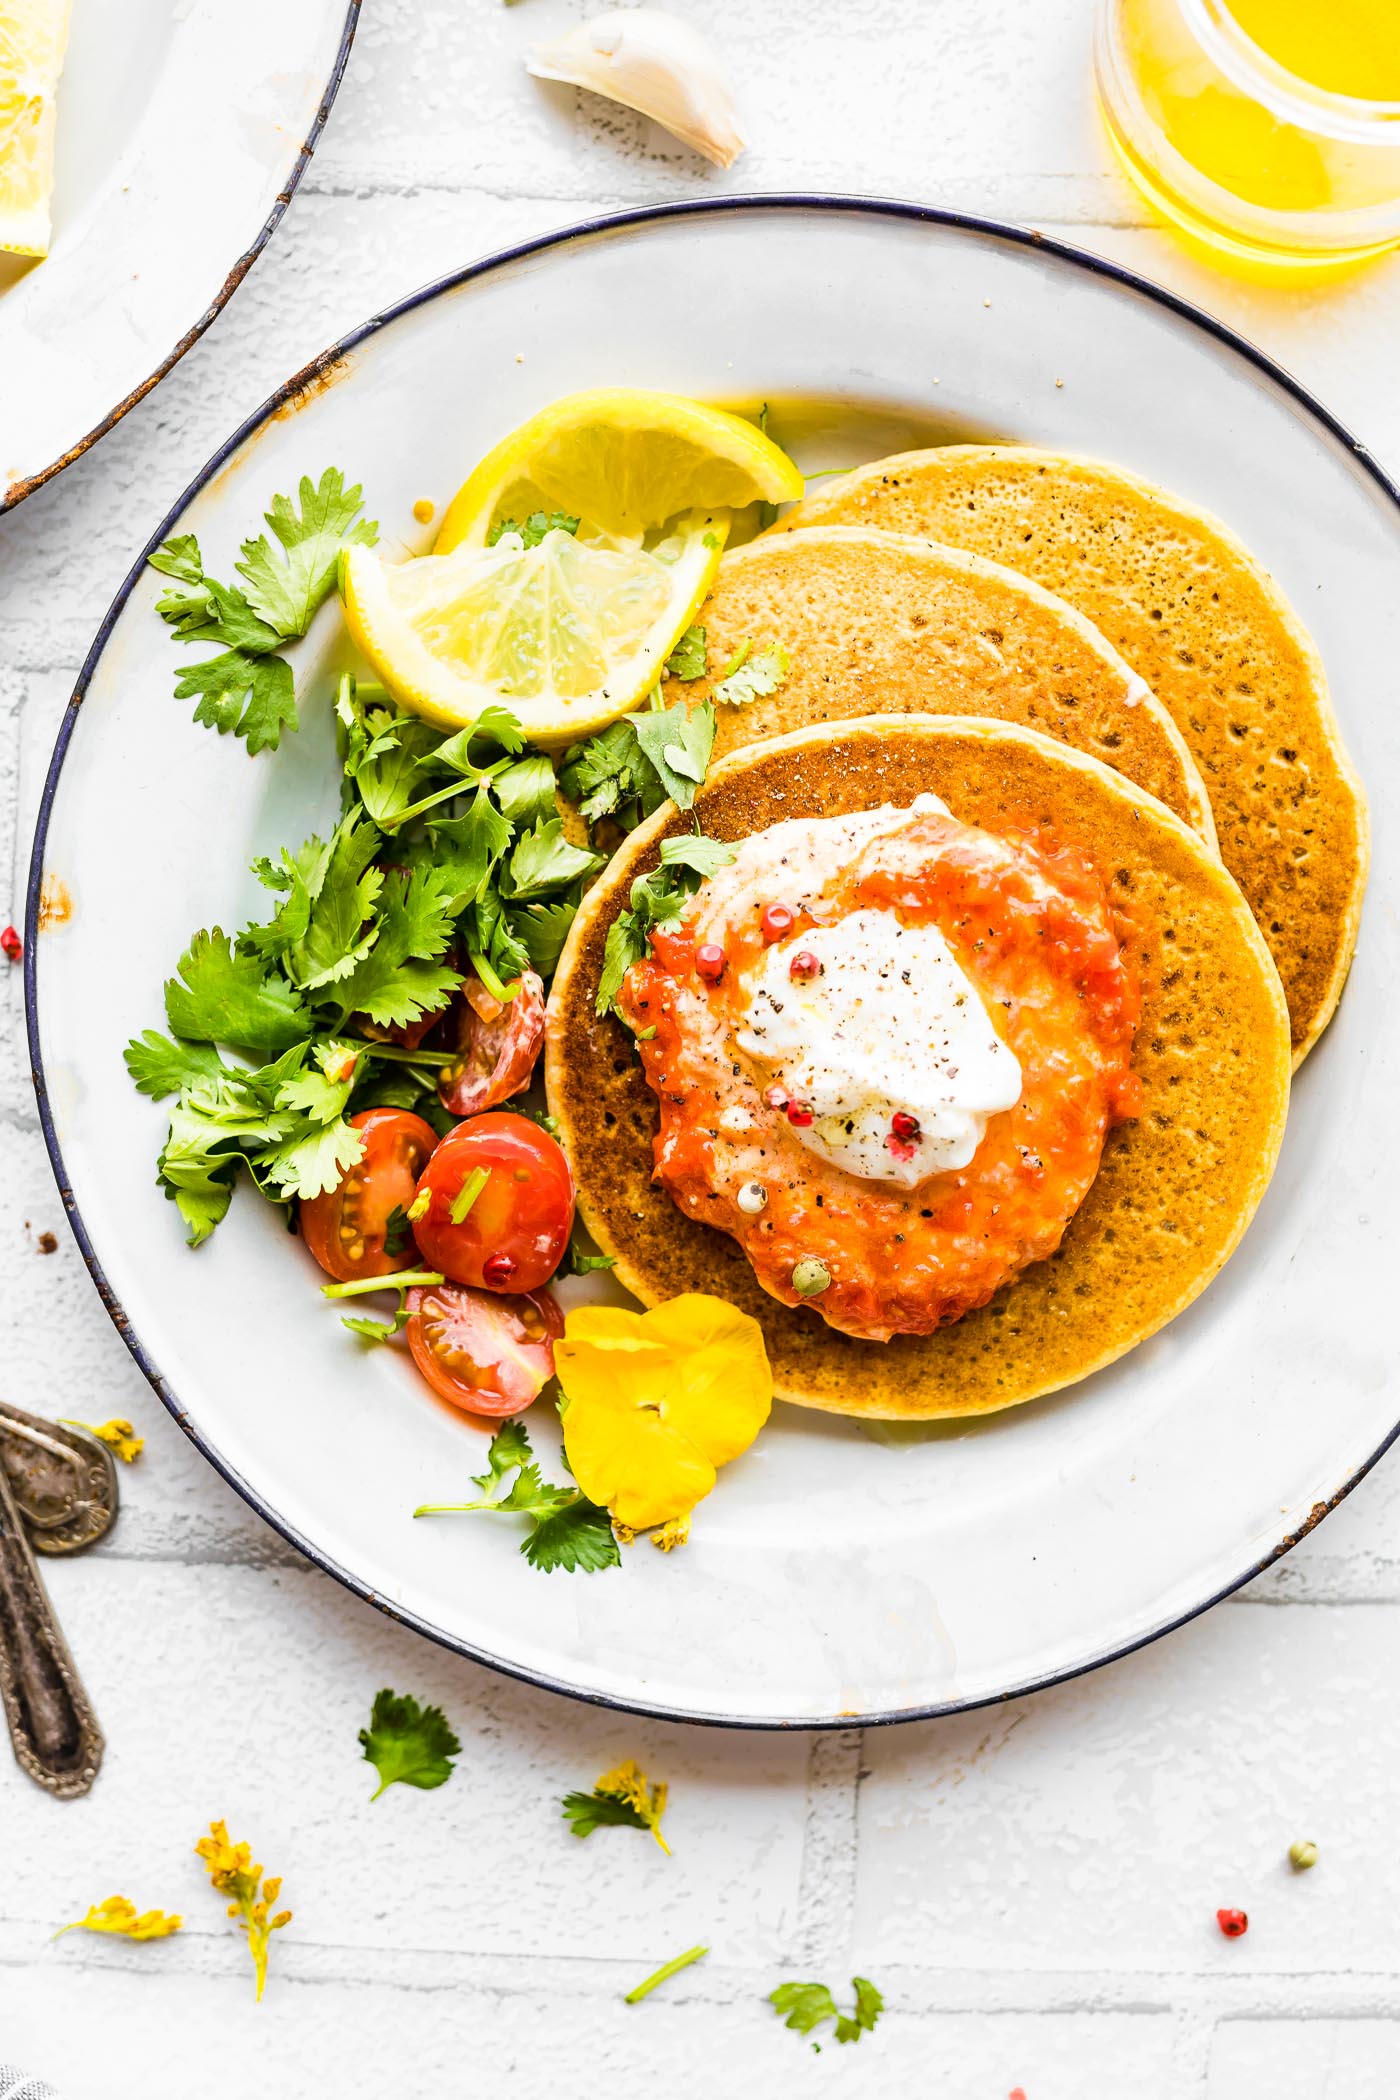 Weekday pancakes suitable for dinner? Sure, why not! These Chickpea Pancakes with Harissa Yogurt Sauce are wholesome and quick to make. A Chickpea flour pancake (Similar to Socca) with a thick and creamy spicy Yogurt topping. Vegetarian, grain free, rich in protein and calcium! 